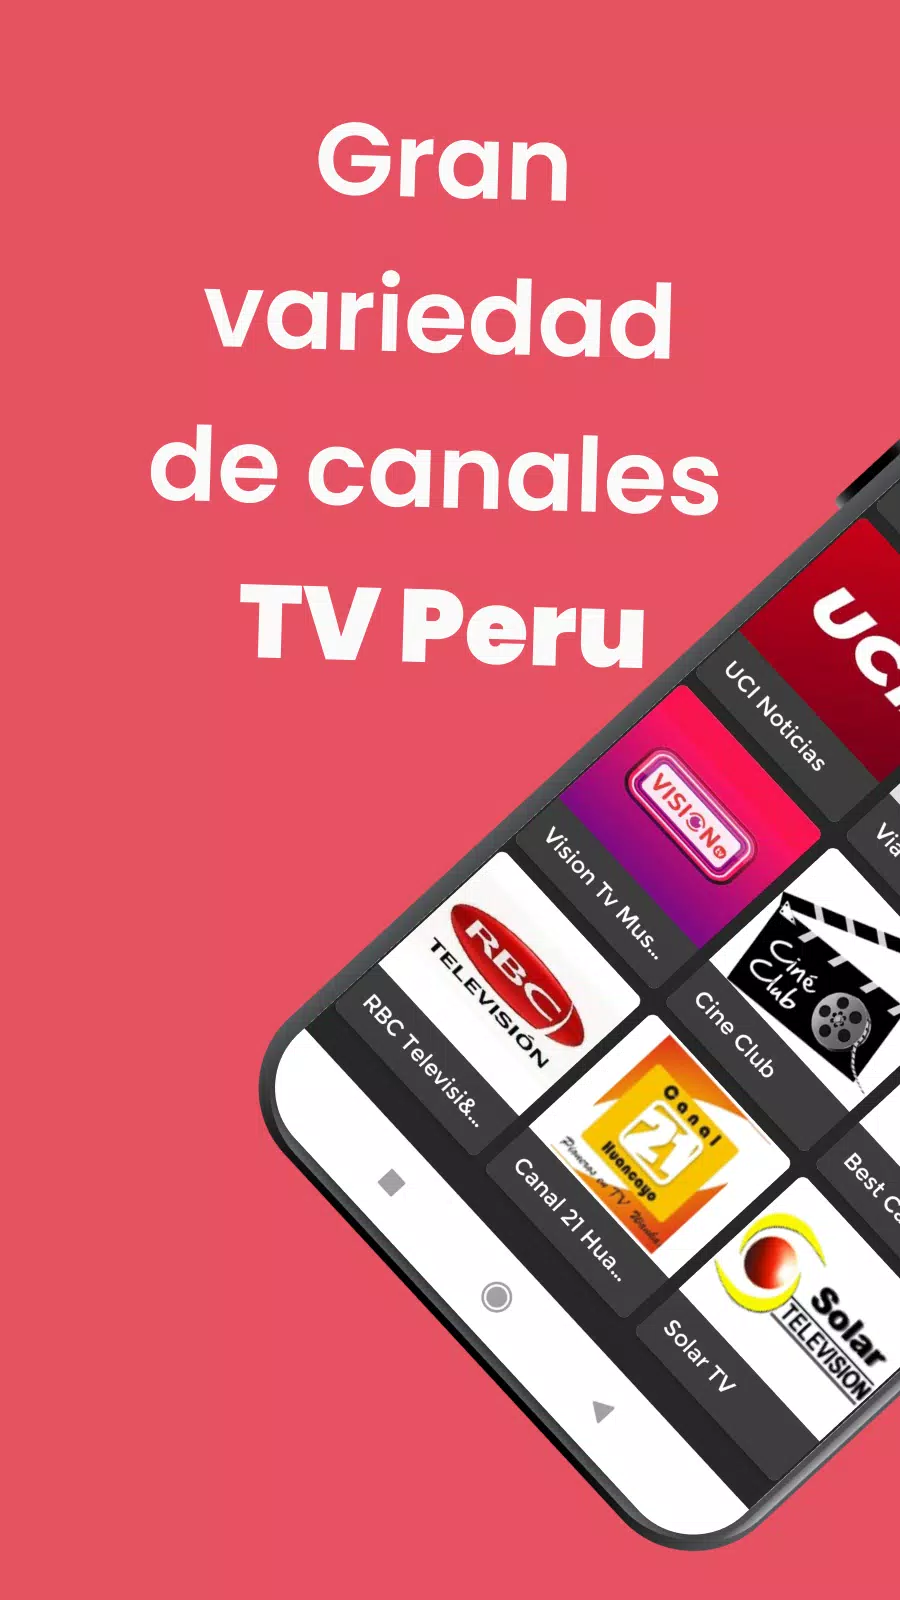 Peru tv canales for Android - APK Download